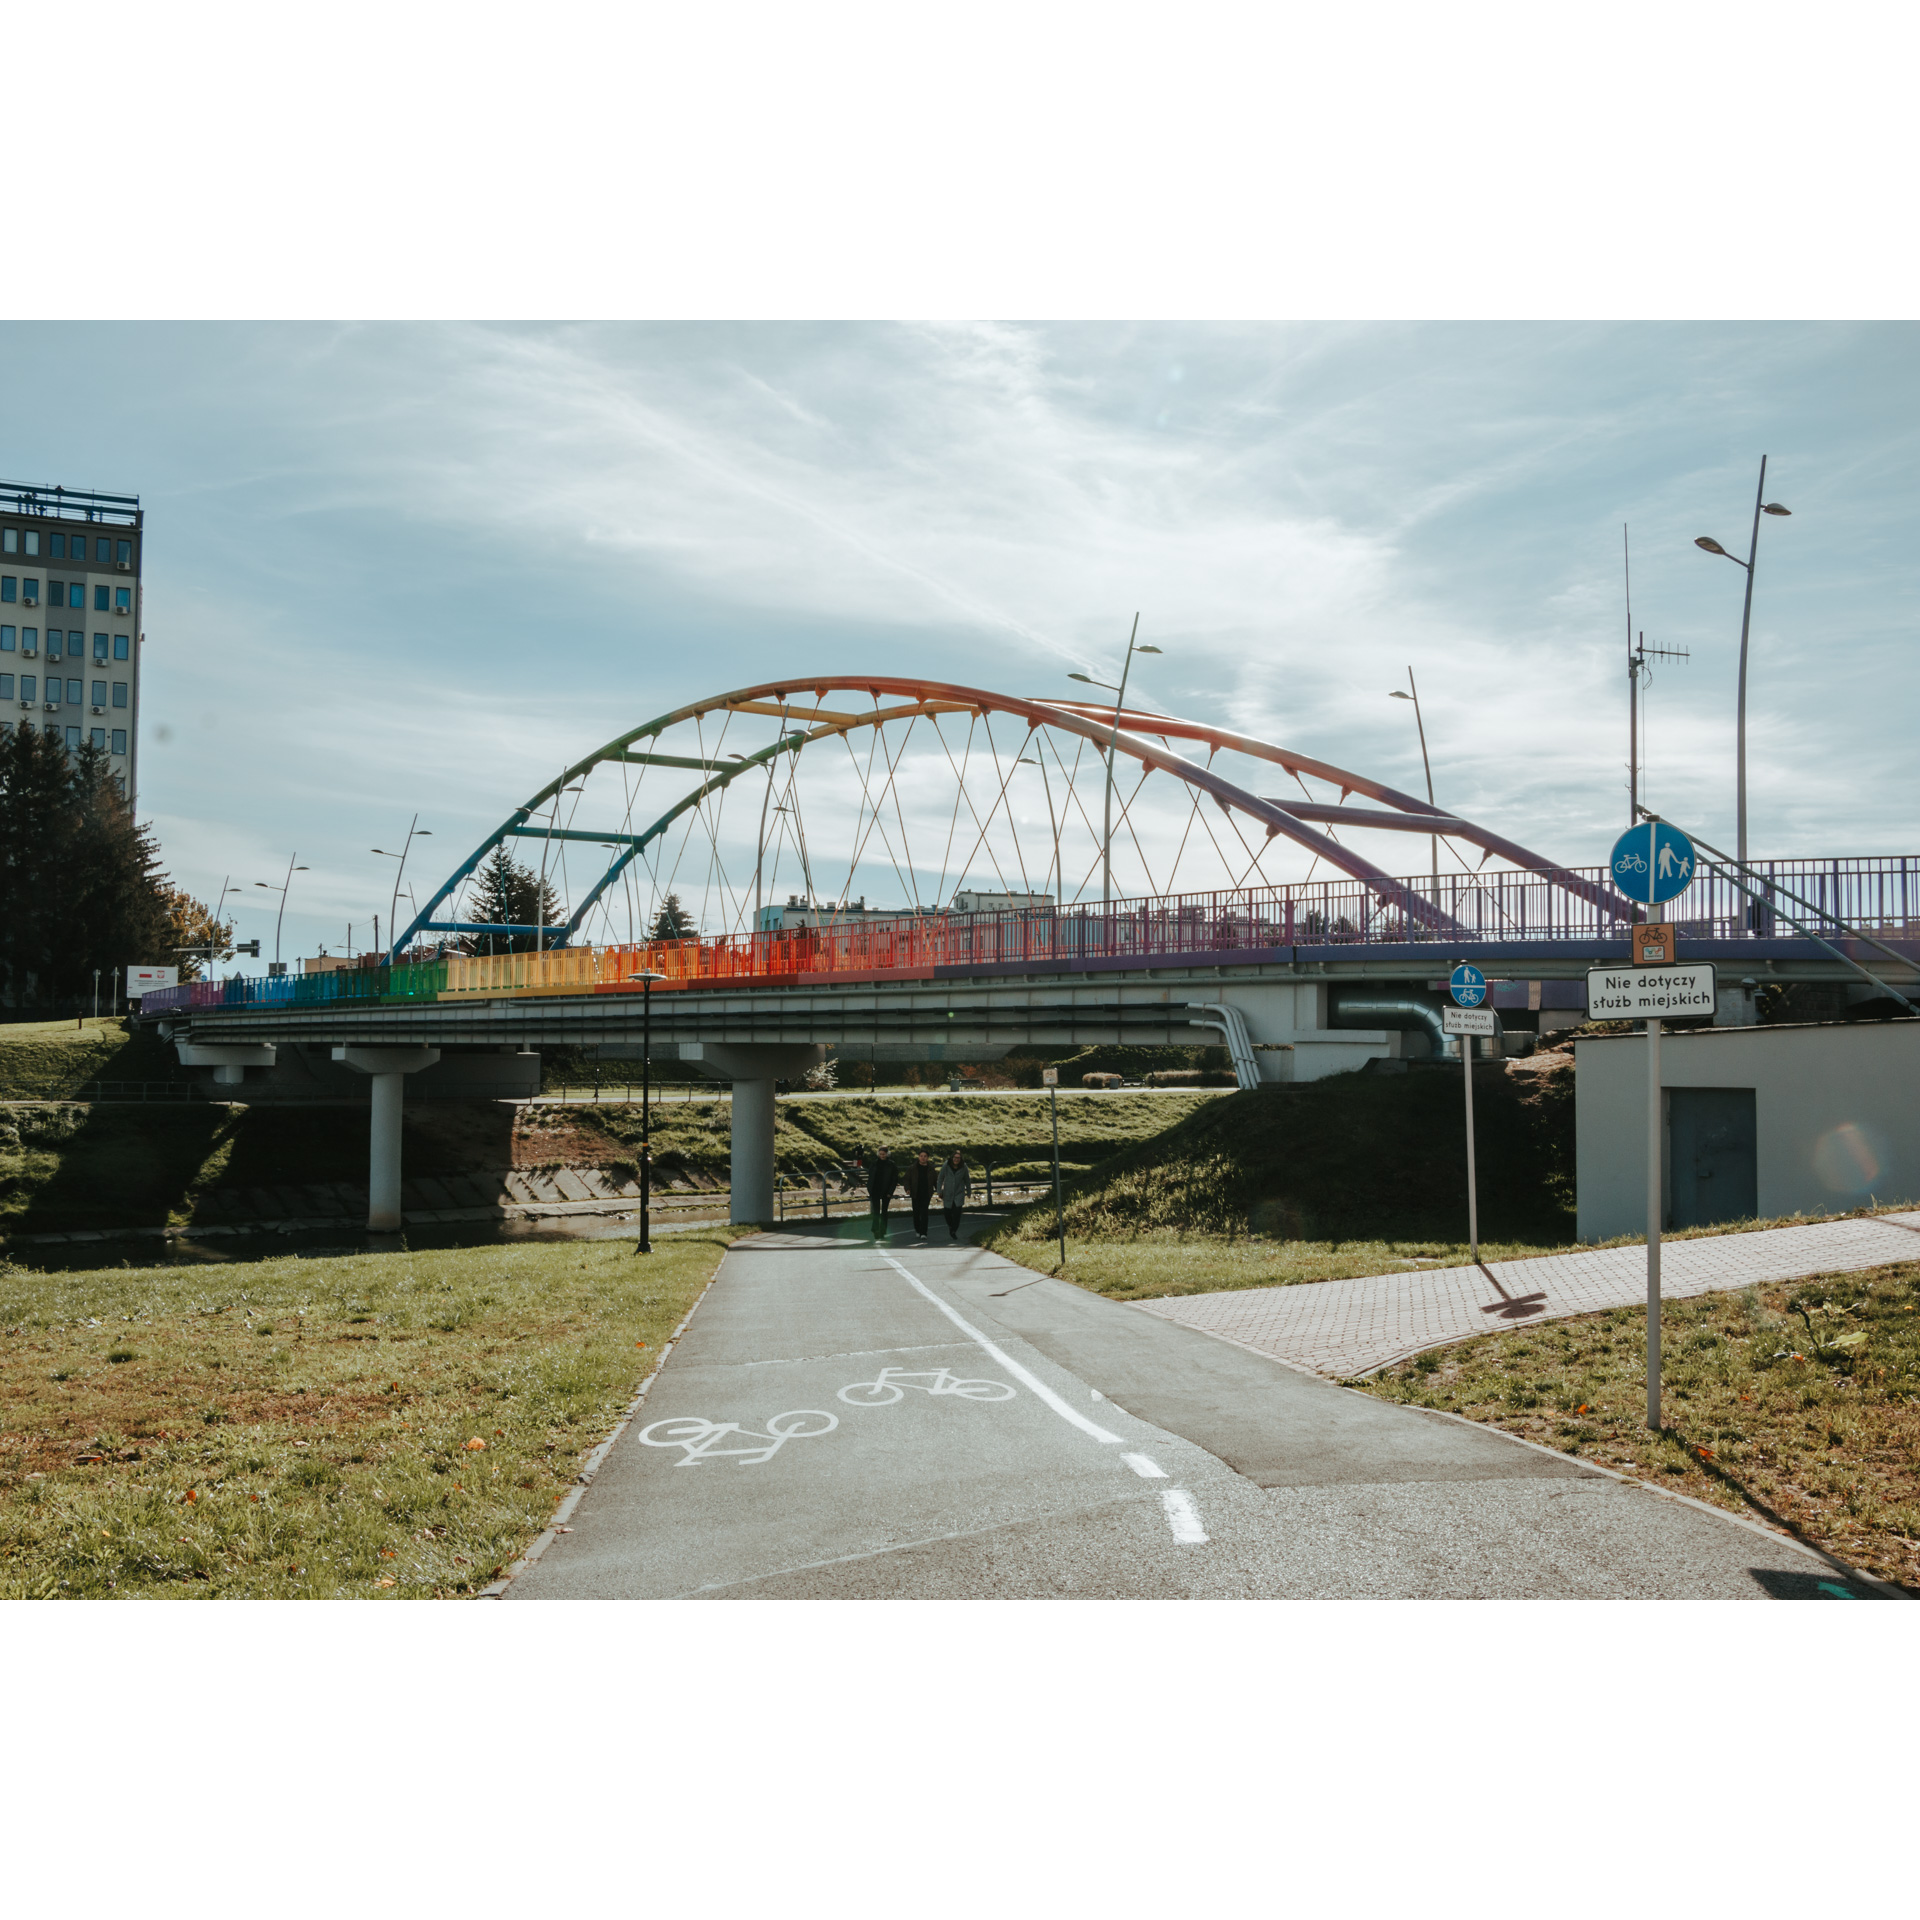 Path for pedestrians and cyclists in the background a rainbow bridge with a semi-circular structure